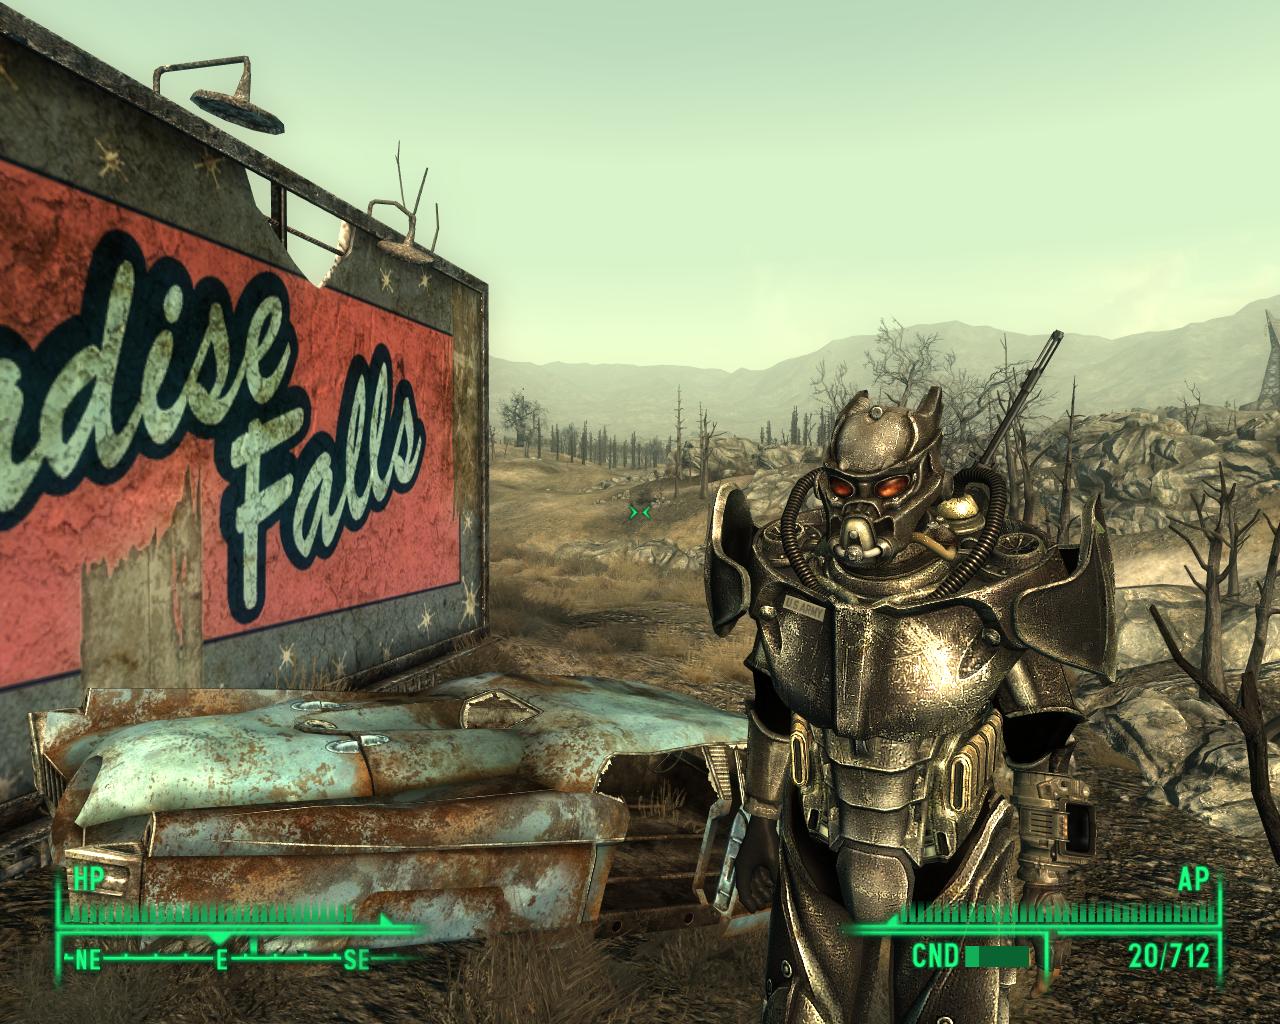 Fallout 3 книги. Фоллаут 3. Fallout 3 Enclave Power Armor. Анклав фоллаут 3. Фоллаут 3 требования.